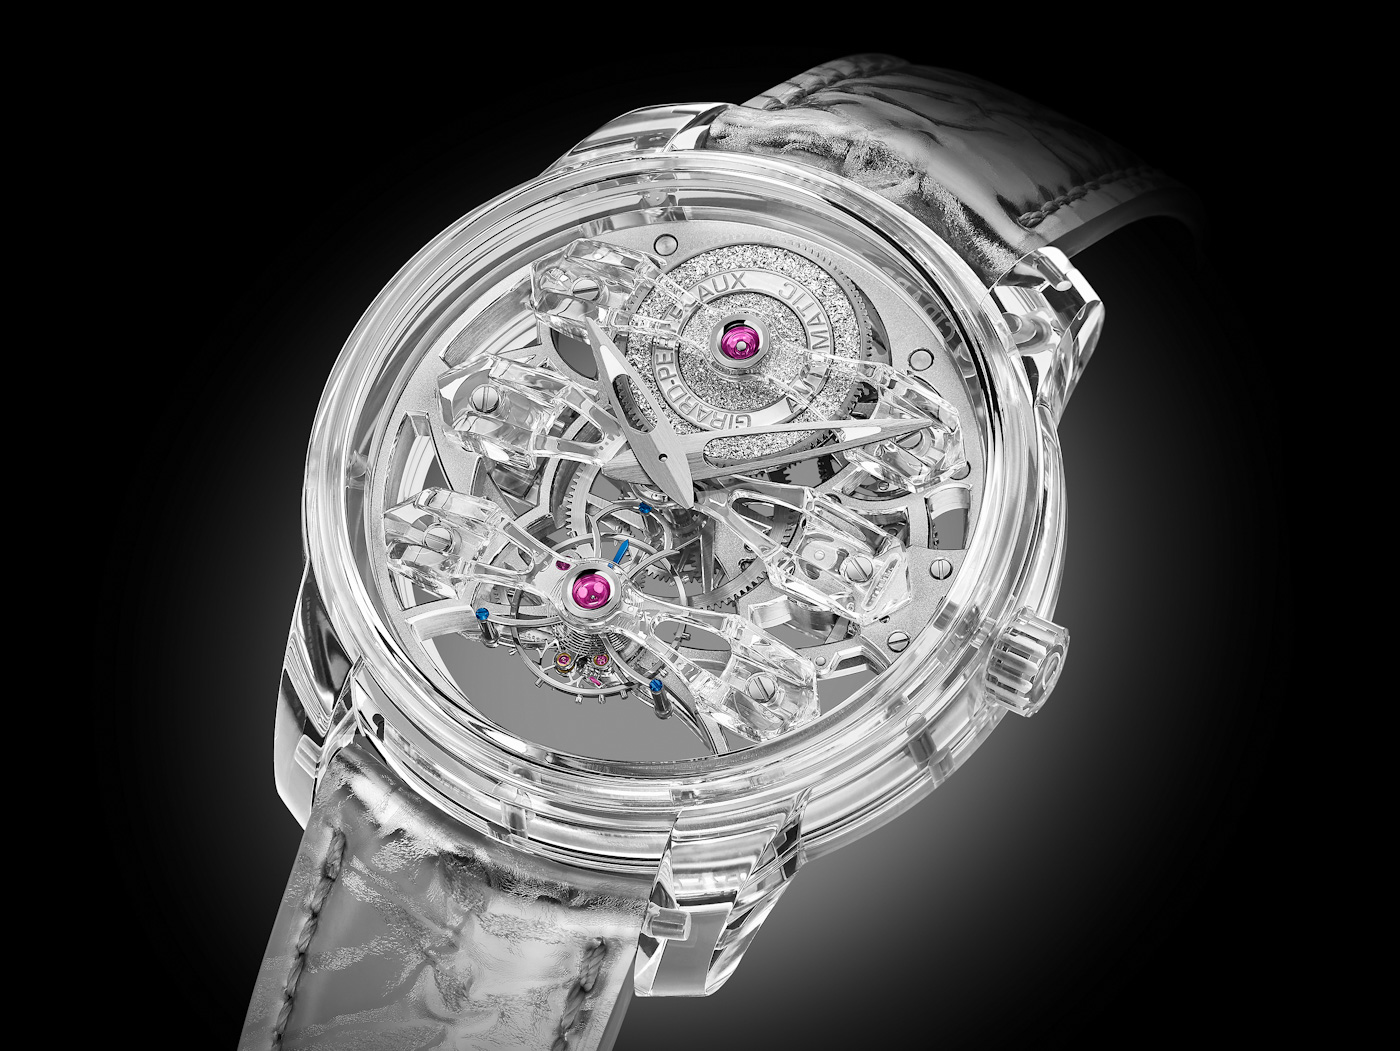 Girard-Perregaux Debuts Limited-Edition Quasar Light Tourbillon Watch With A Case Made From A Single Sapphire Disk